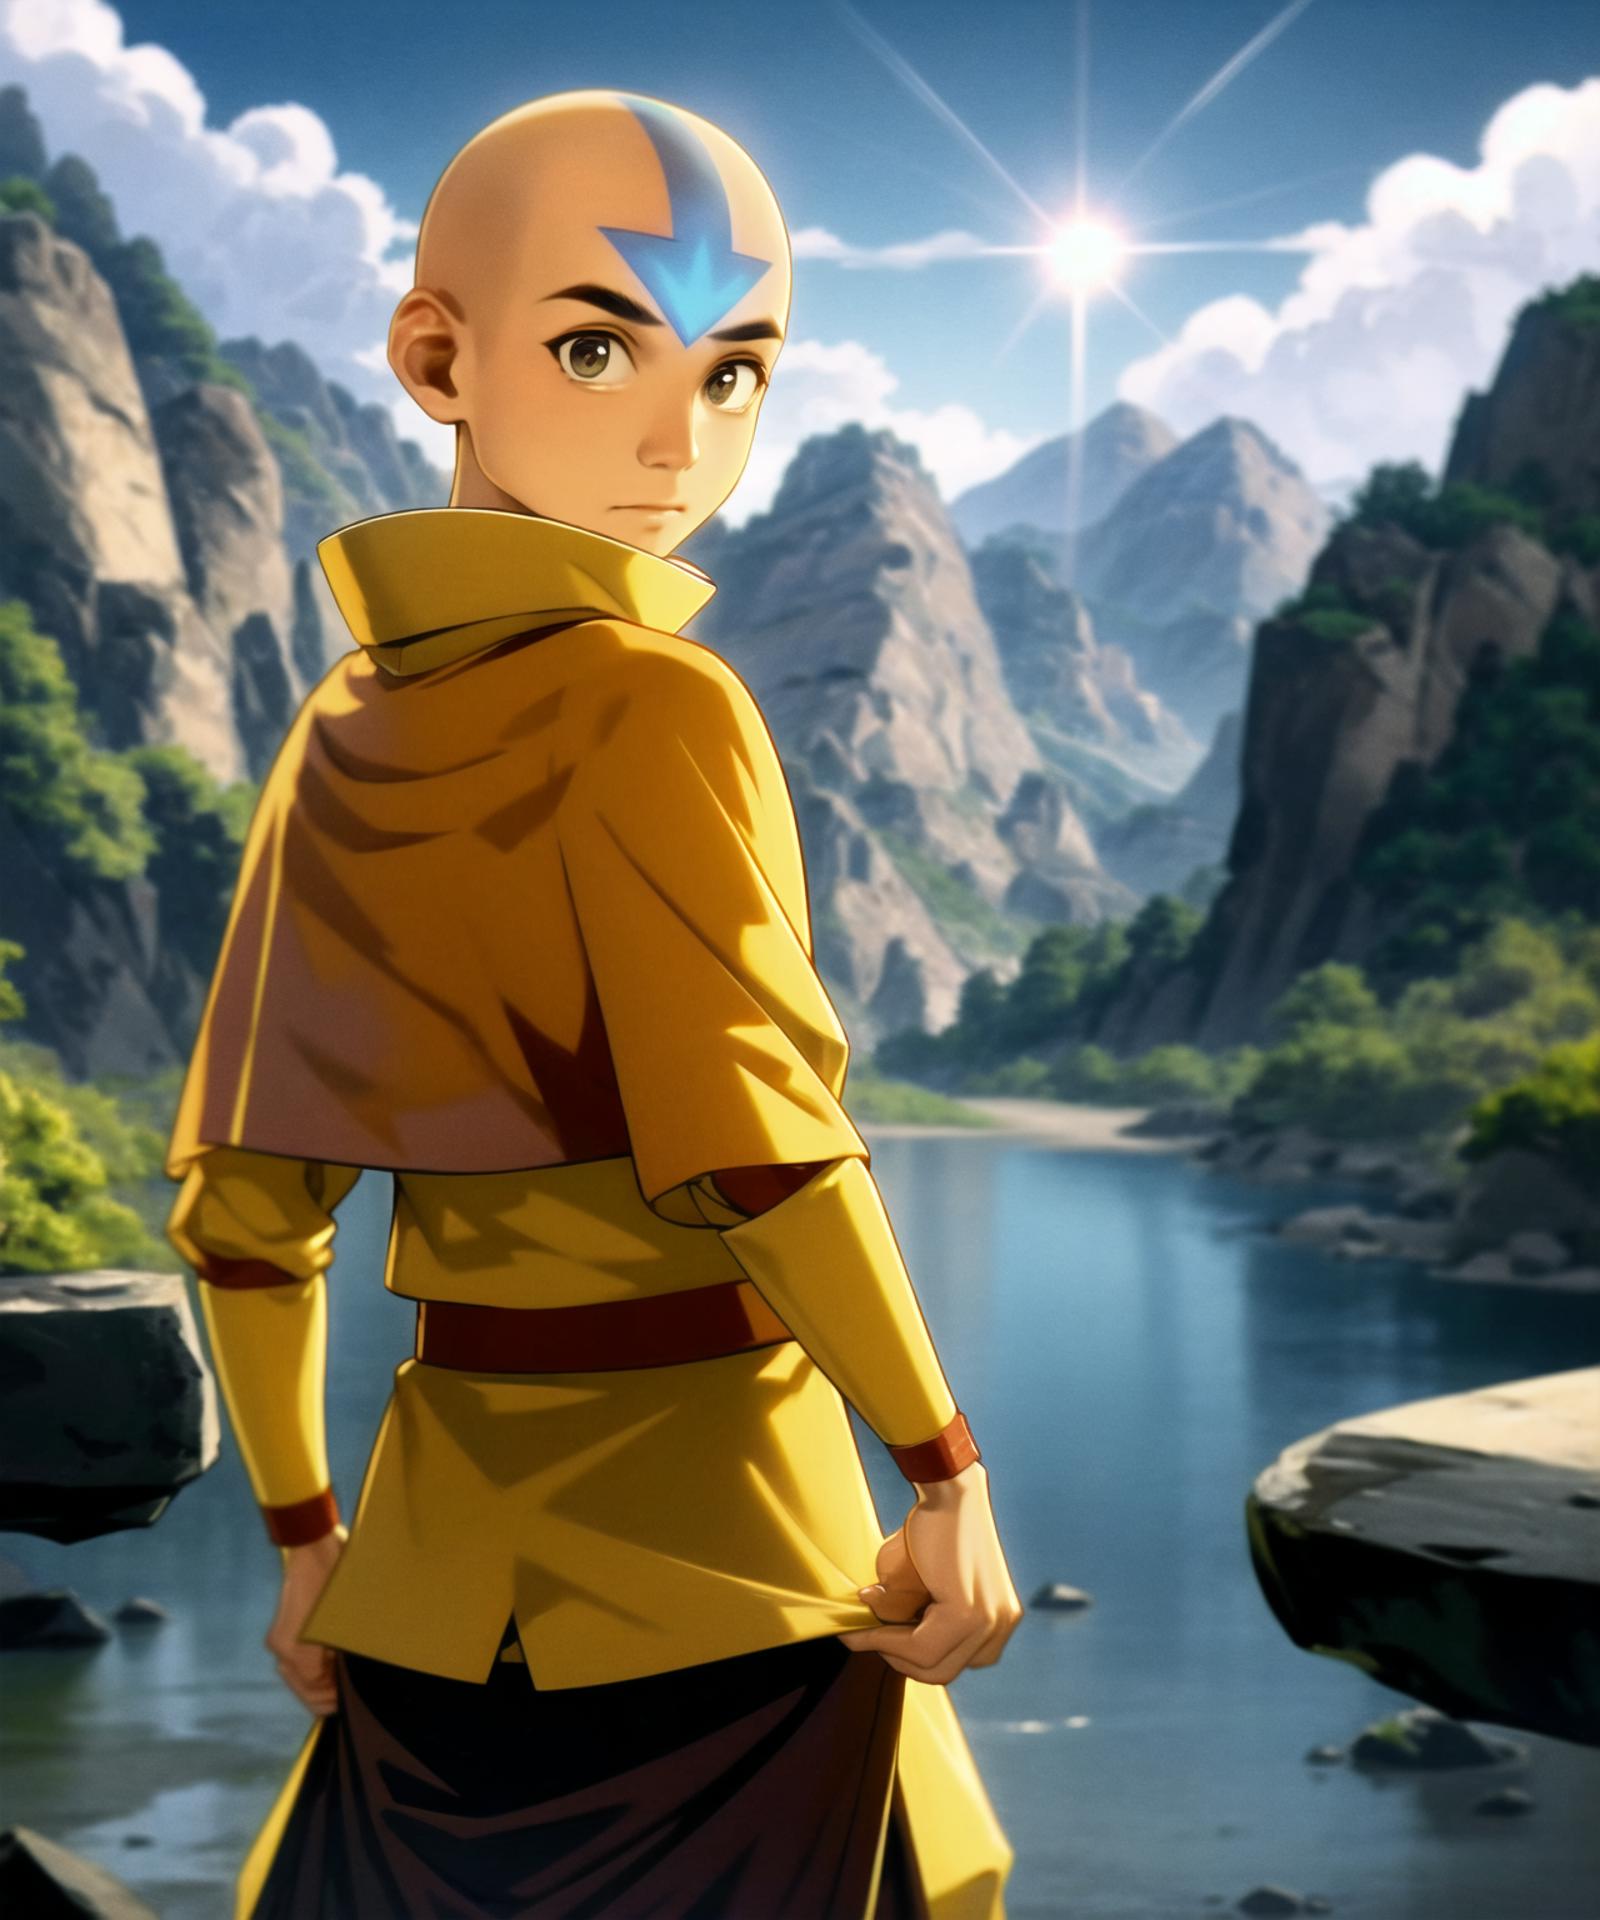 Aang - Avatar: The Last Airbender image by guanabanajuice7650